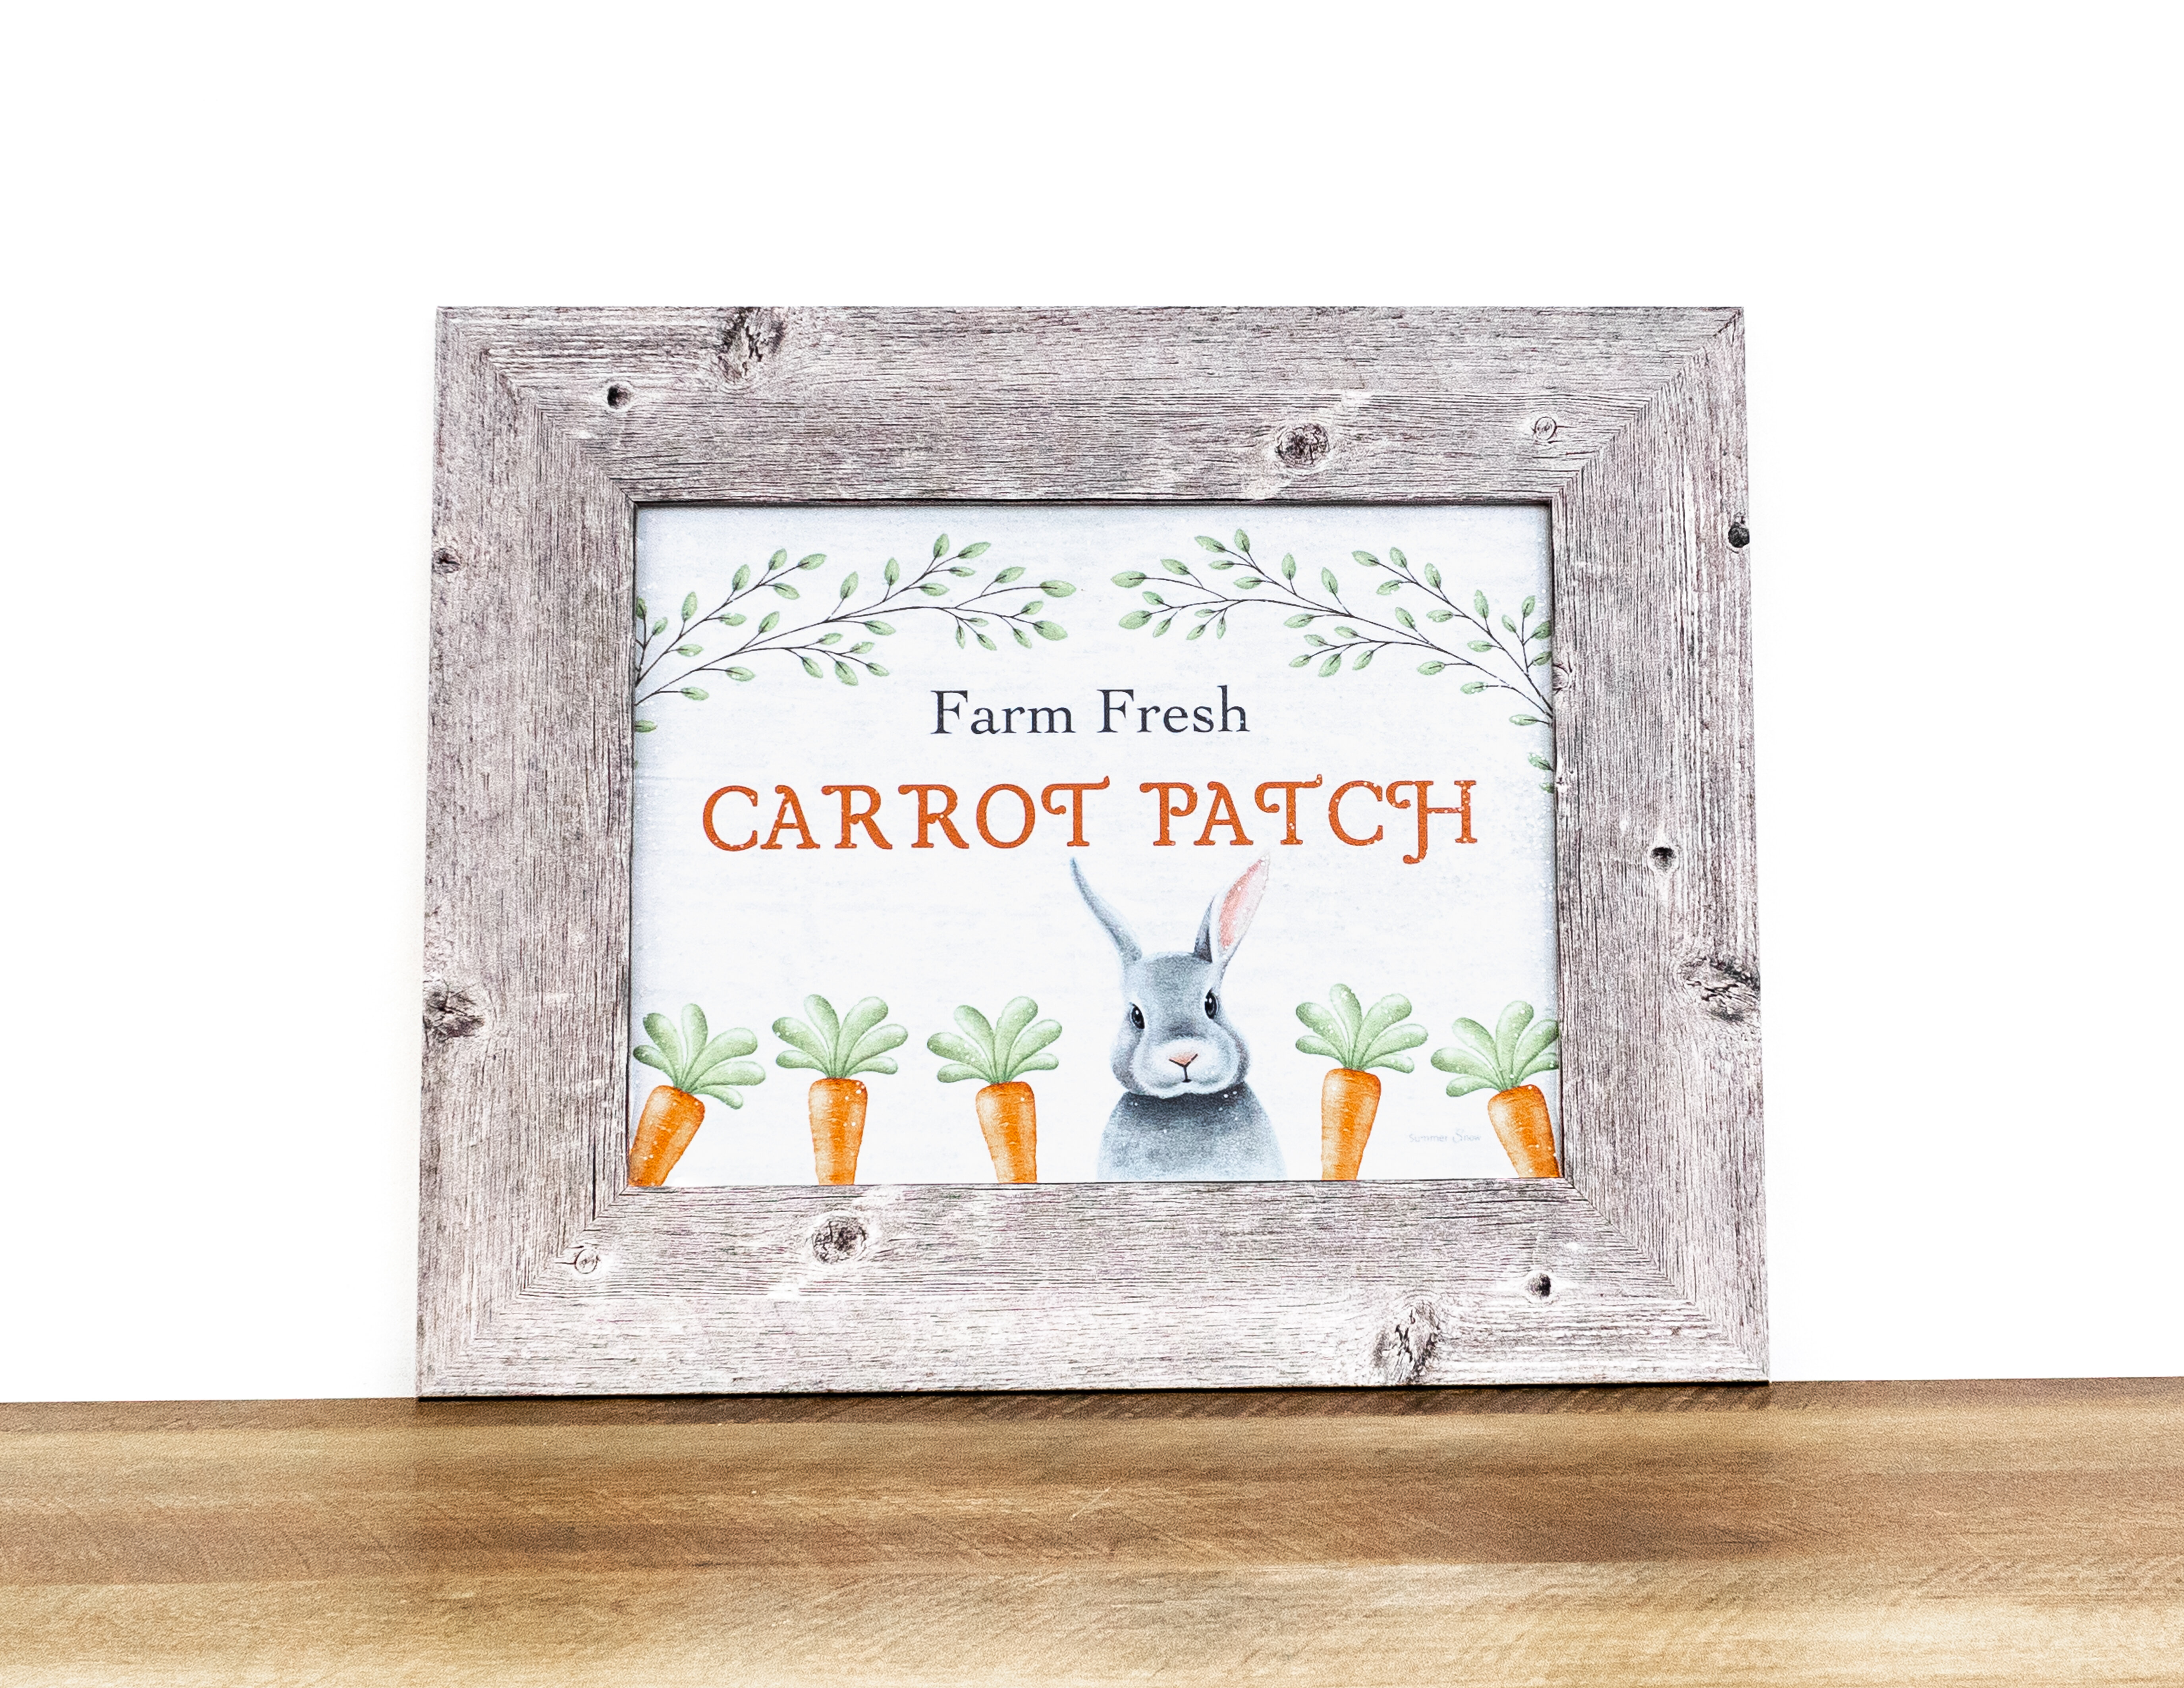 Cottontail Farms Bunny Rabbit Easter Printed Handmade Sign 